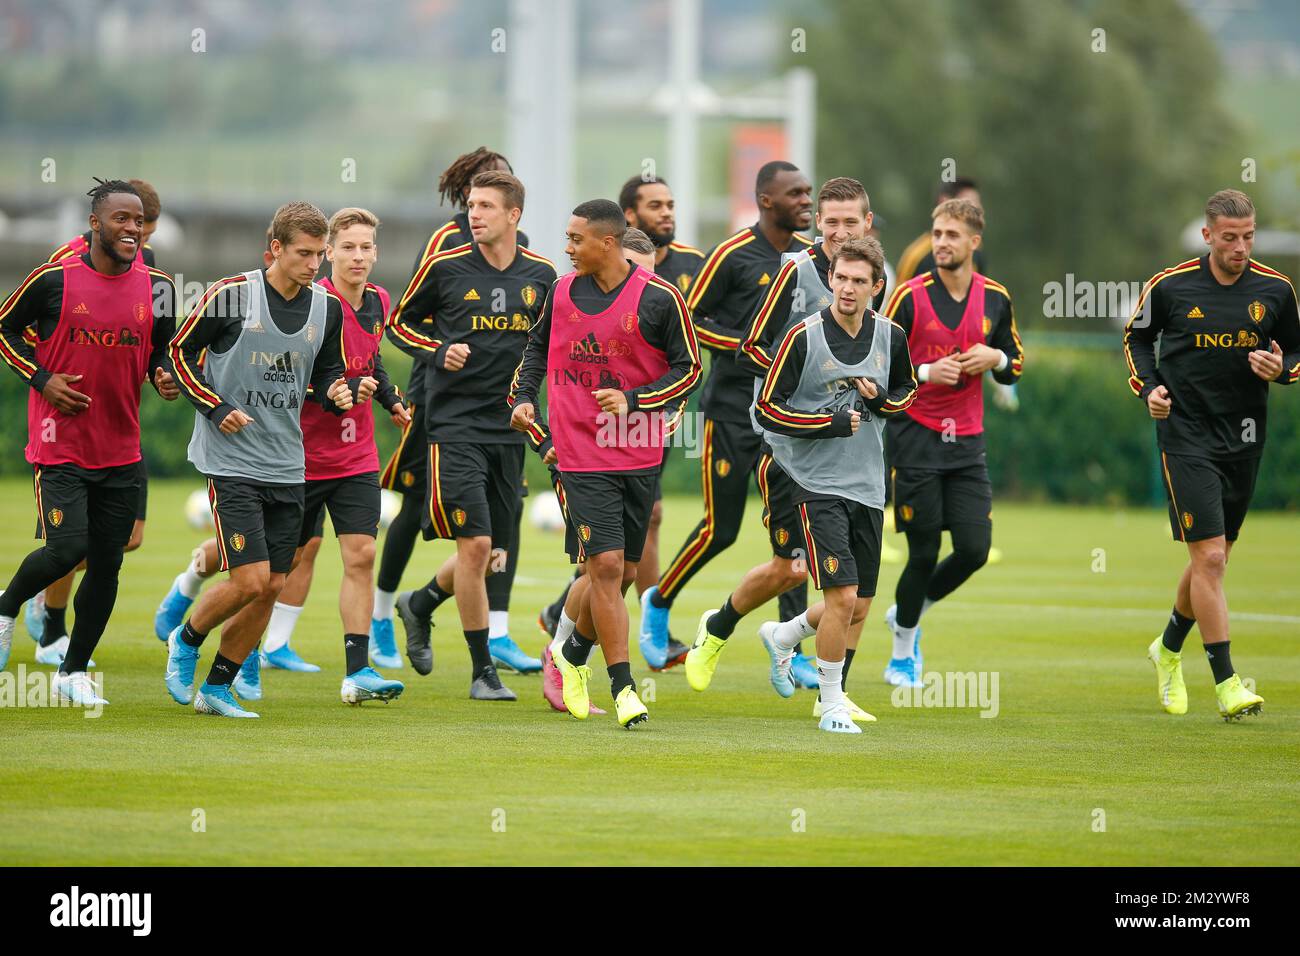 Belgium's players pictured during a training session of Belgian national team the Red Devils in Tubize, Wednesday 04 September 2019. The team is preparing for two Euro 2020 qualifiers, against San Marino on Friday and Scotland next Tuesday. BELGA PHOTO BRUNO FAHY Stock Photo